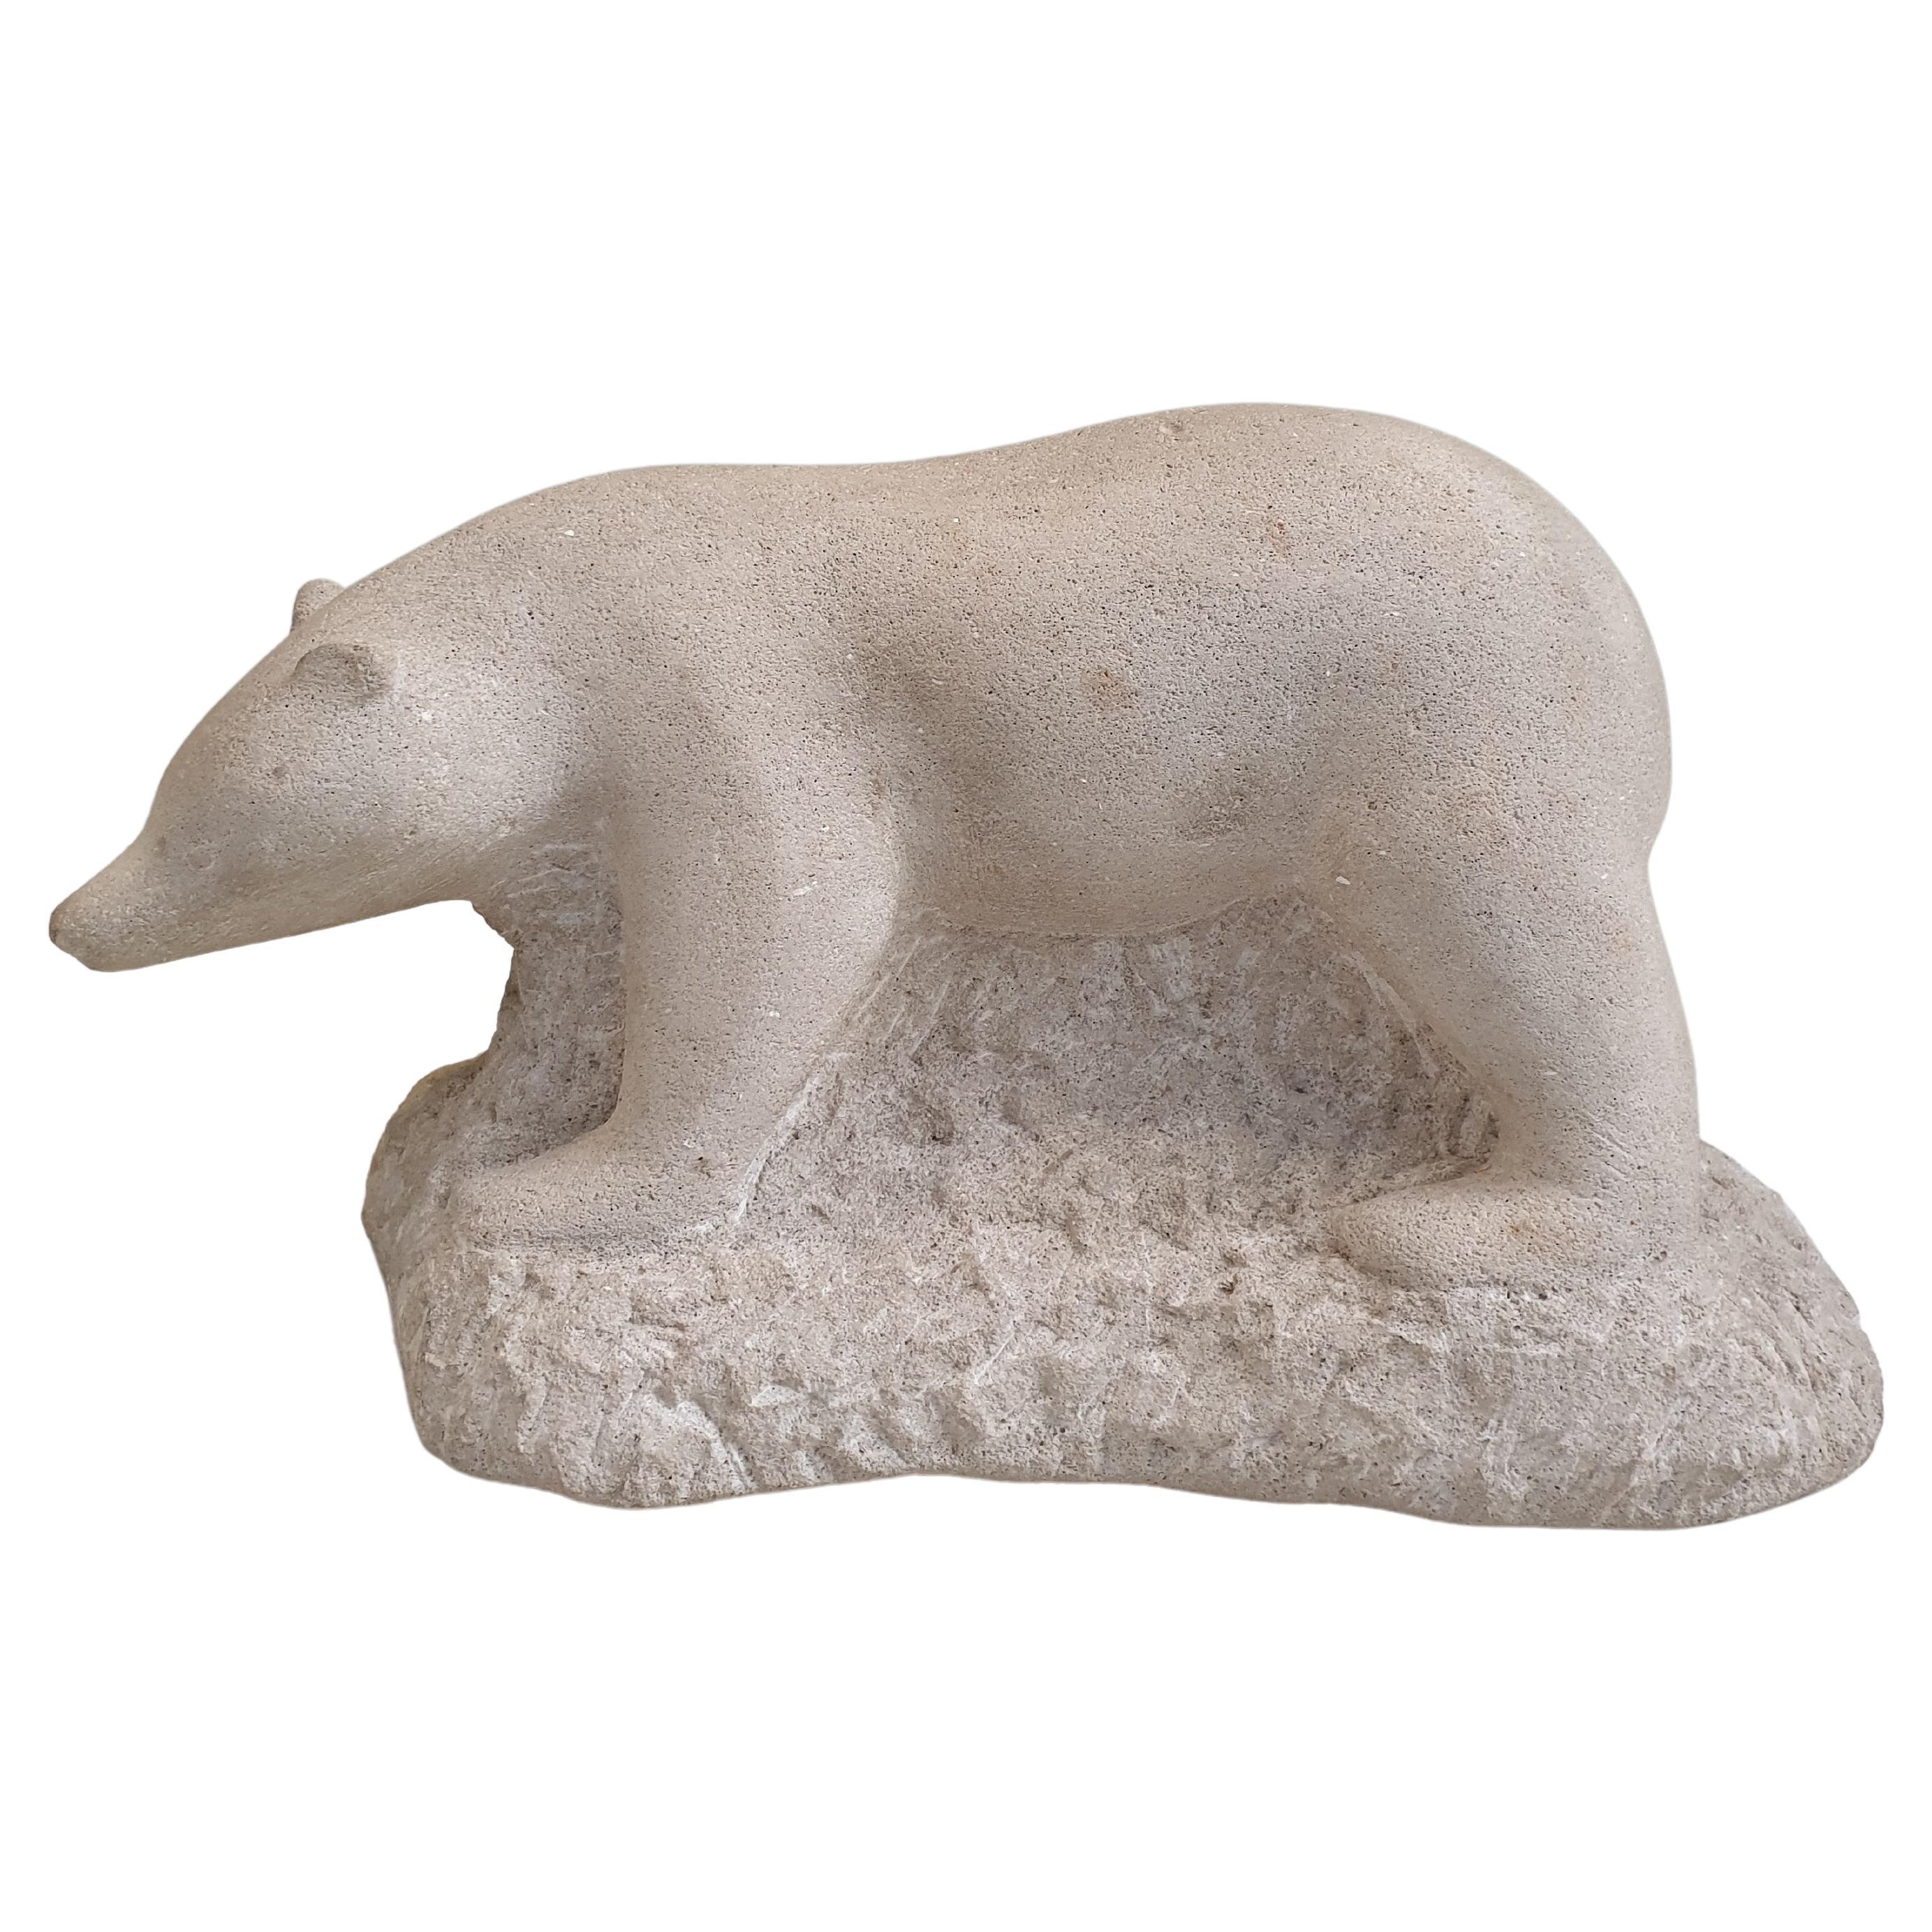 Carved stone sculpture of a polar bear, signed. For Sale